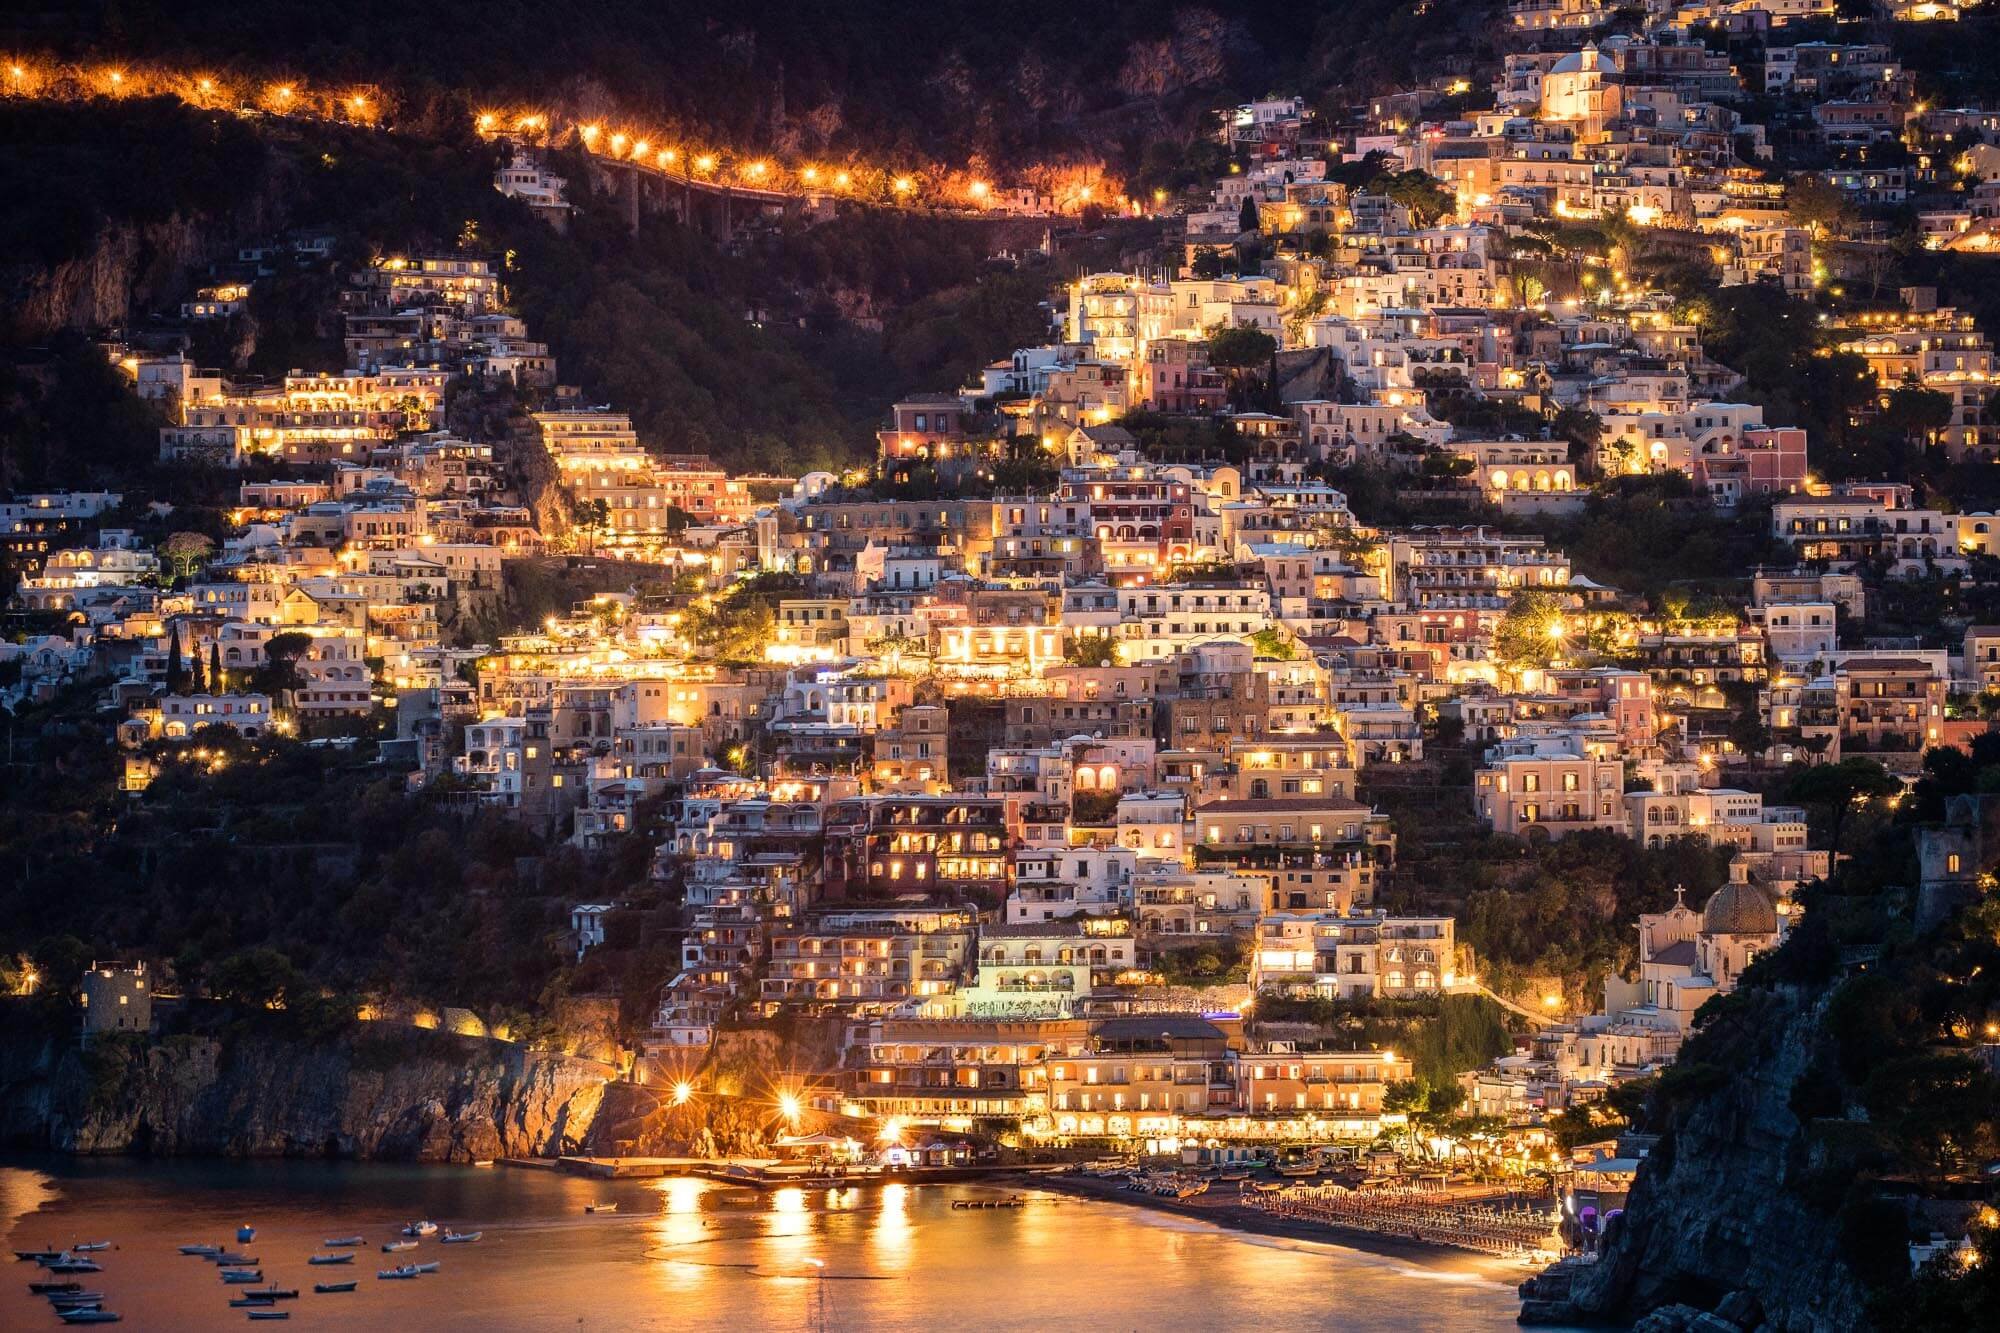 How to get to Positano: my favorite route is via ferry from Salerno to Positano.